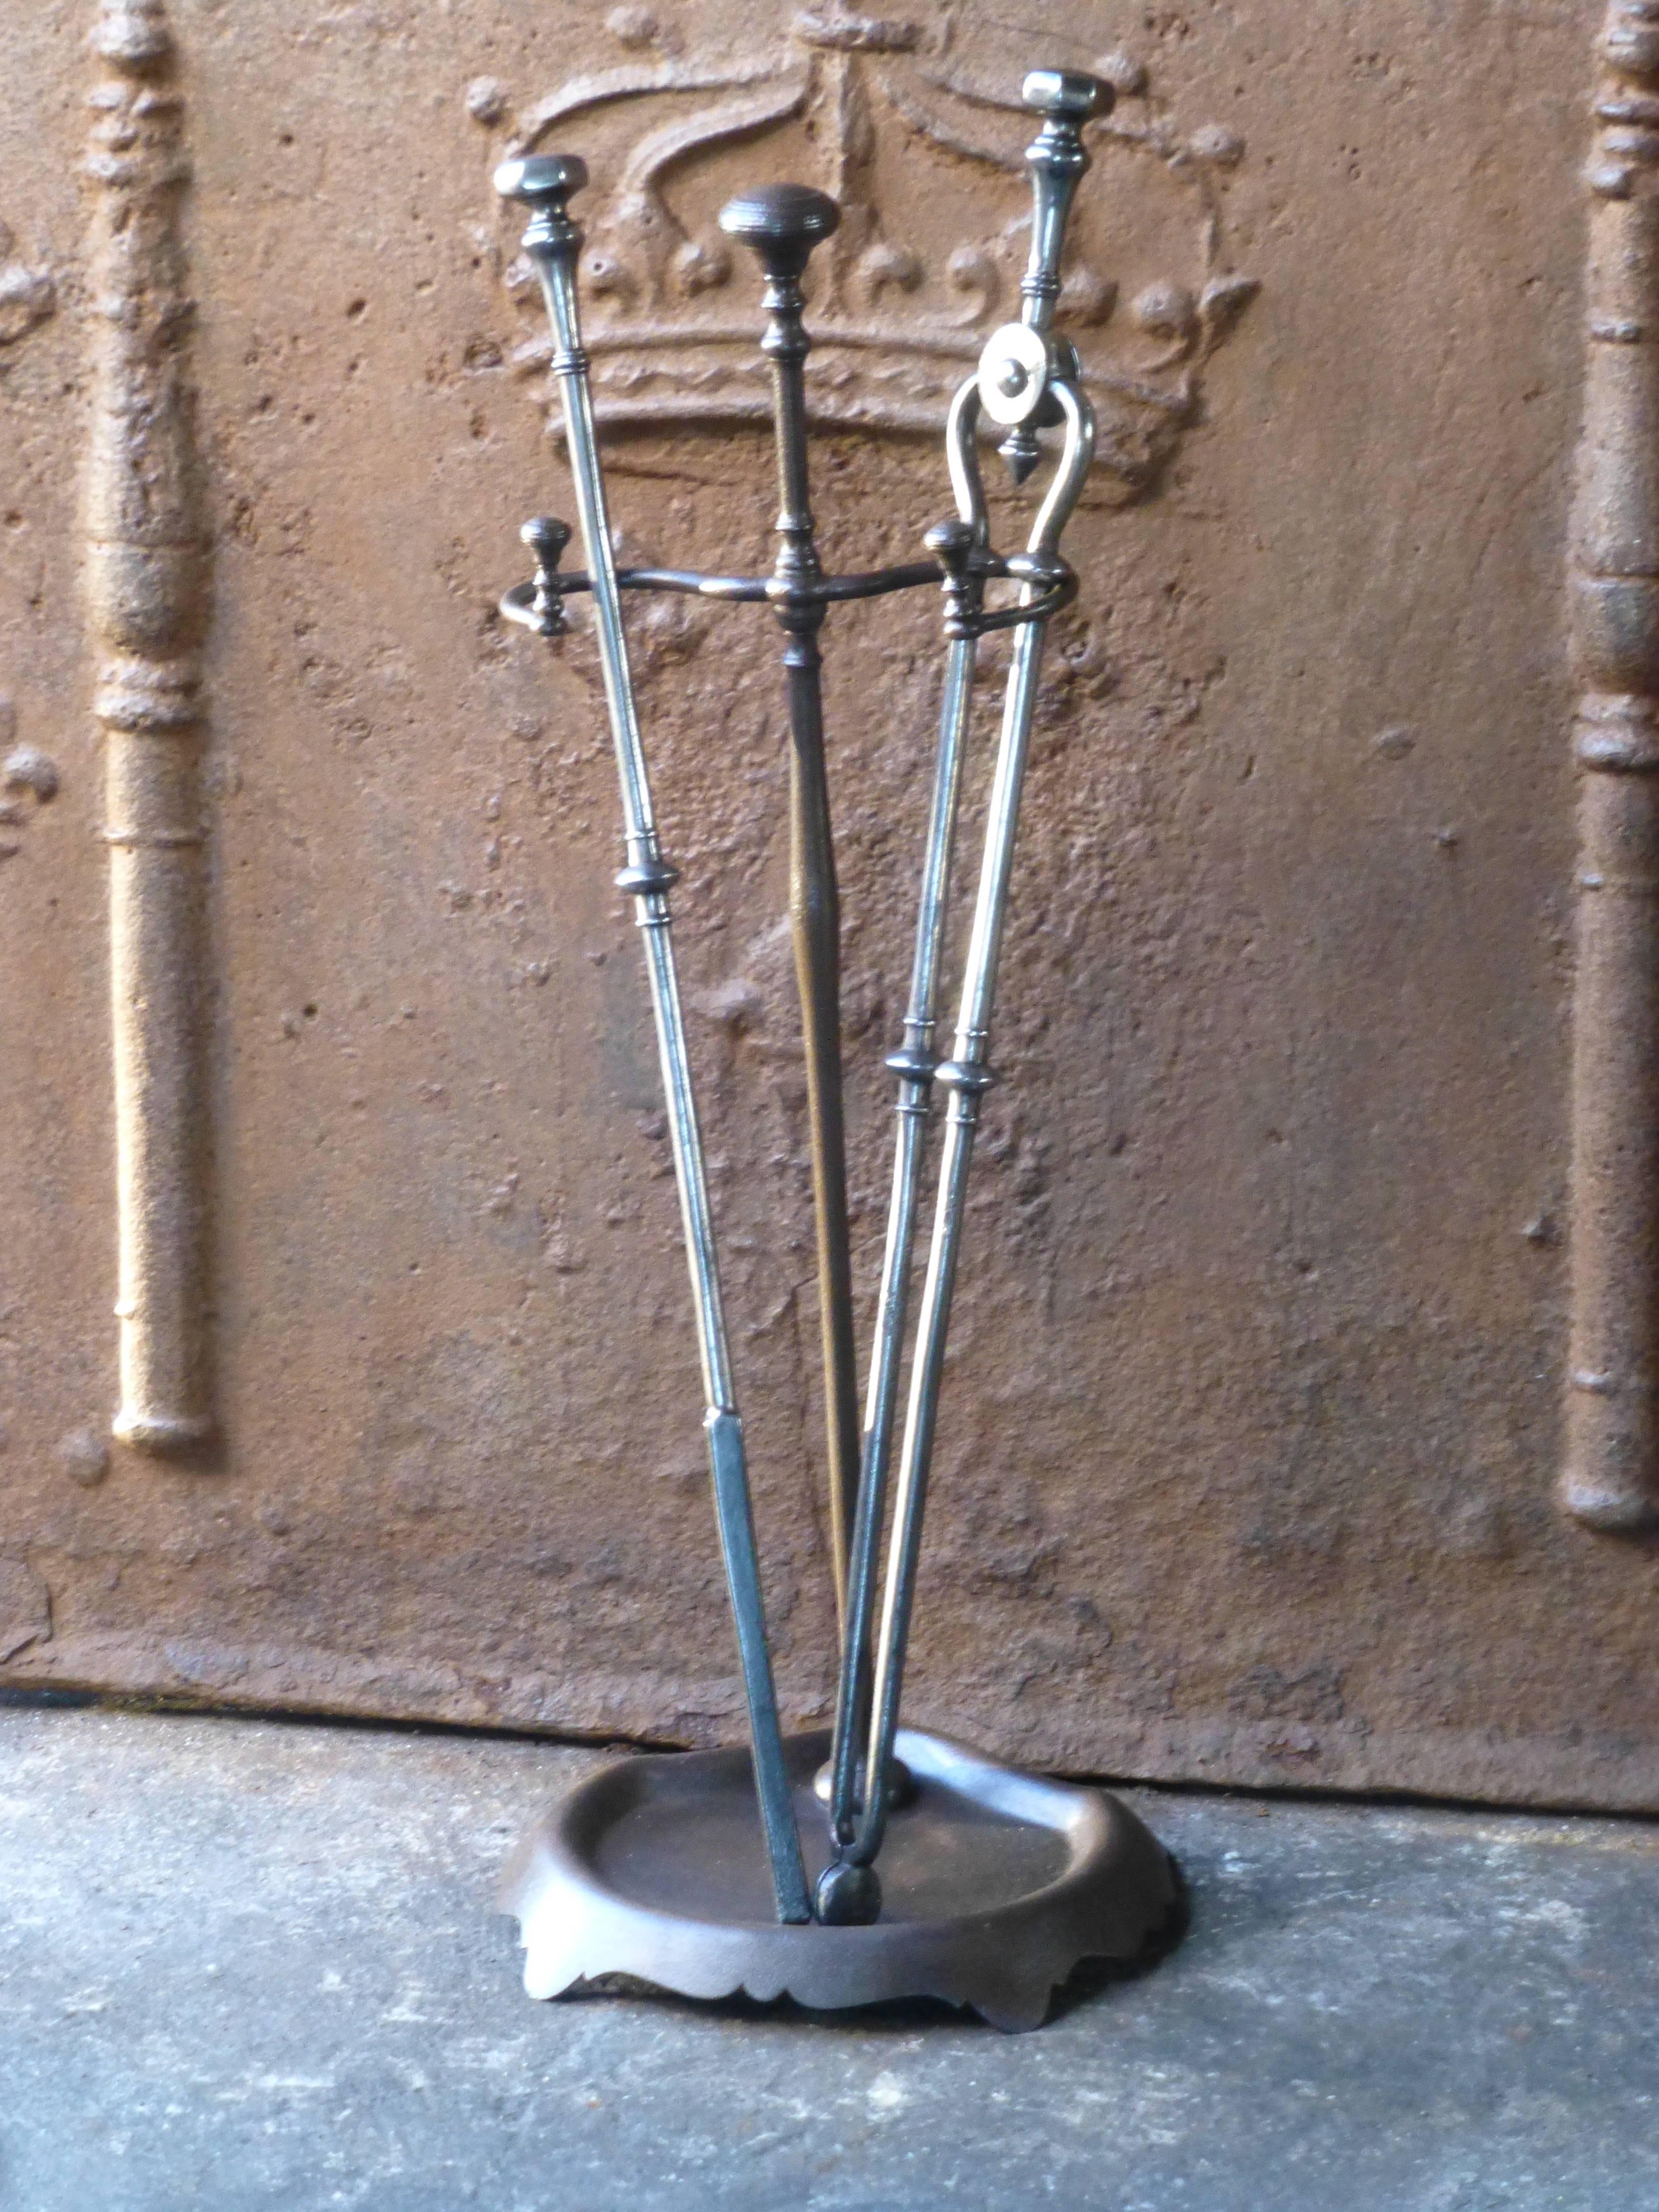 19th century, English fireplace toolset made of wrought iron and polished steel. Victorian period. The condition is good.

